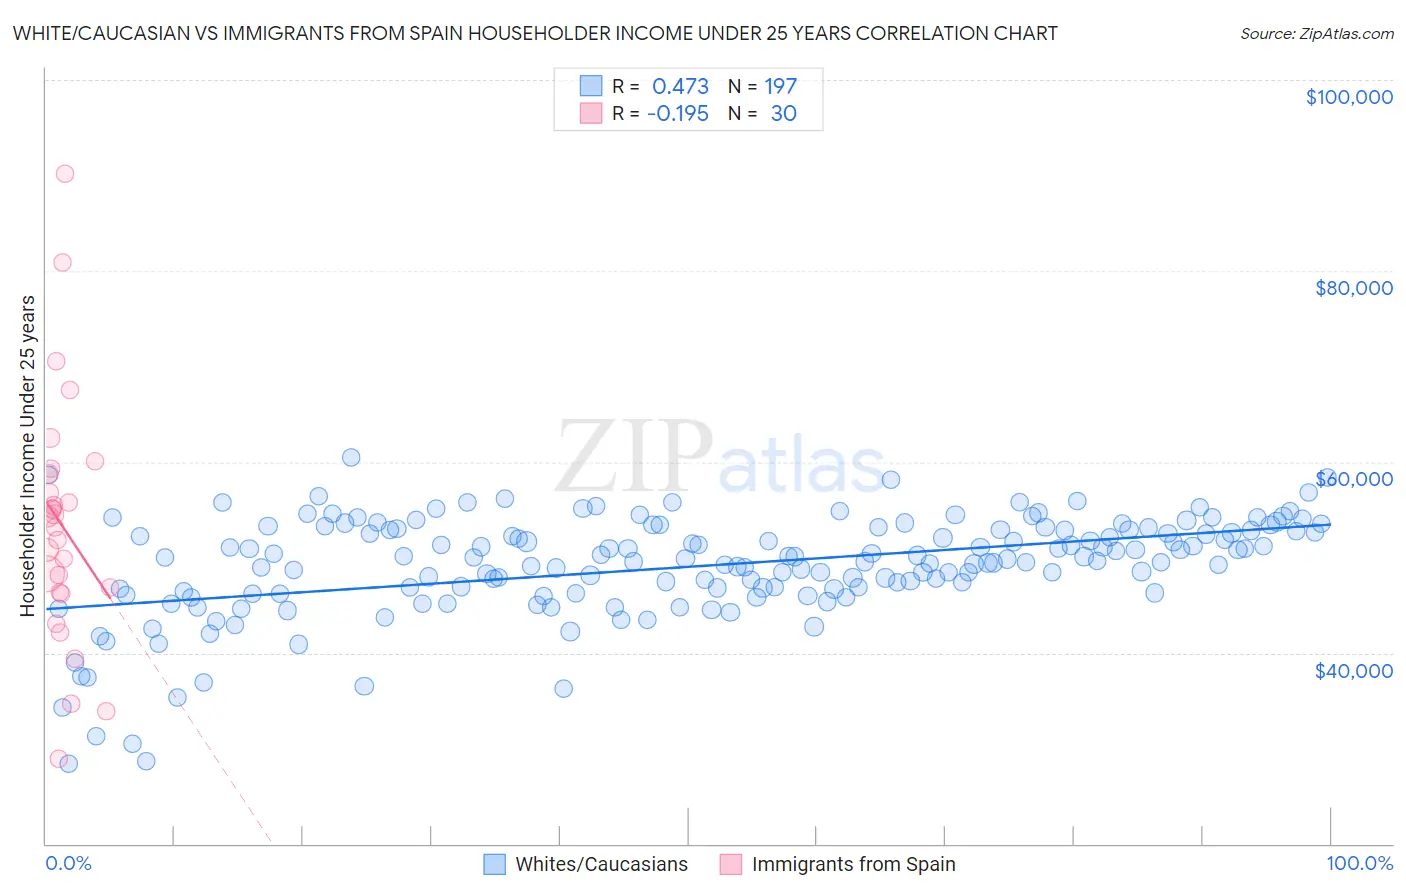 White/Caucasian vs Immigrants from Spain Householder Income Under 25 years